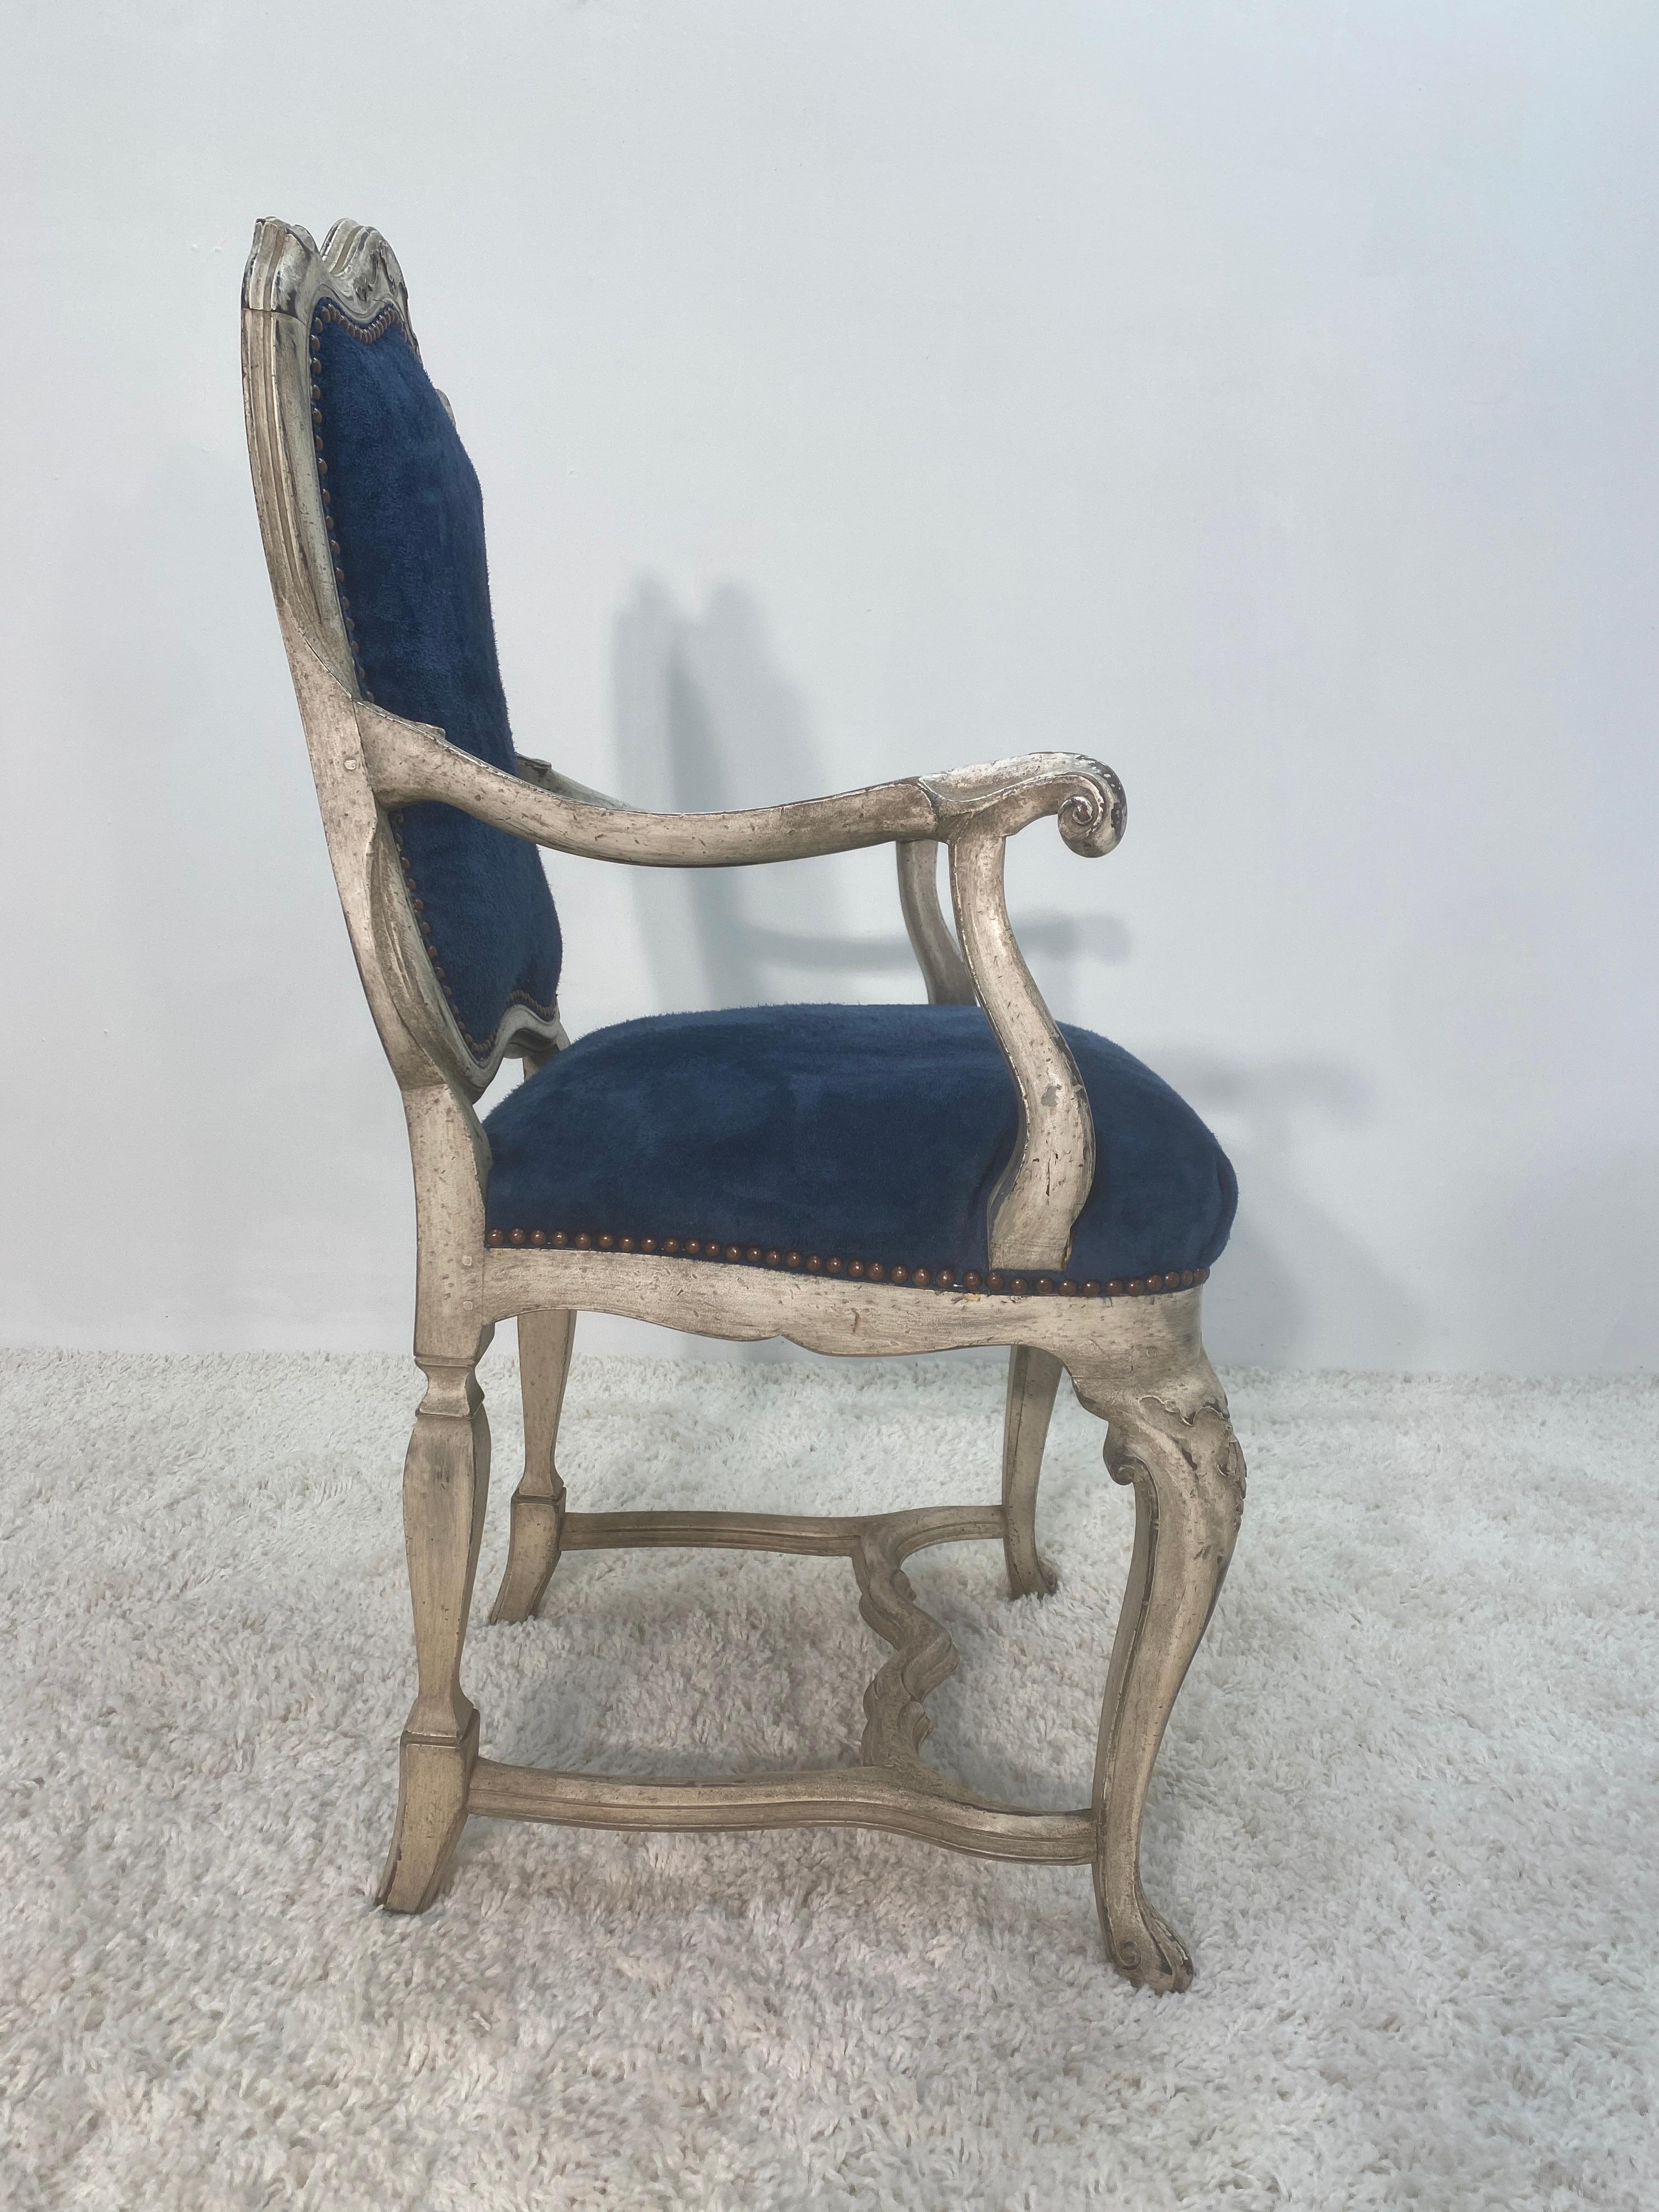 19th Century Painted Dutch Arm Chair in Blue Suede 1